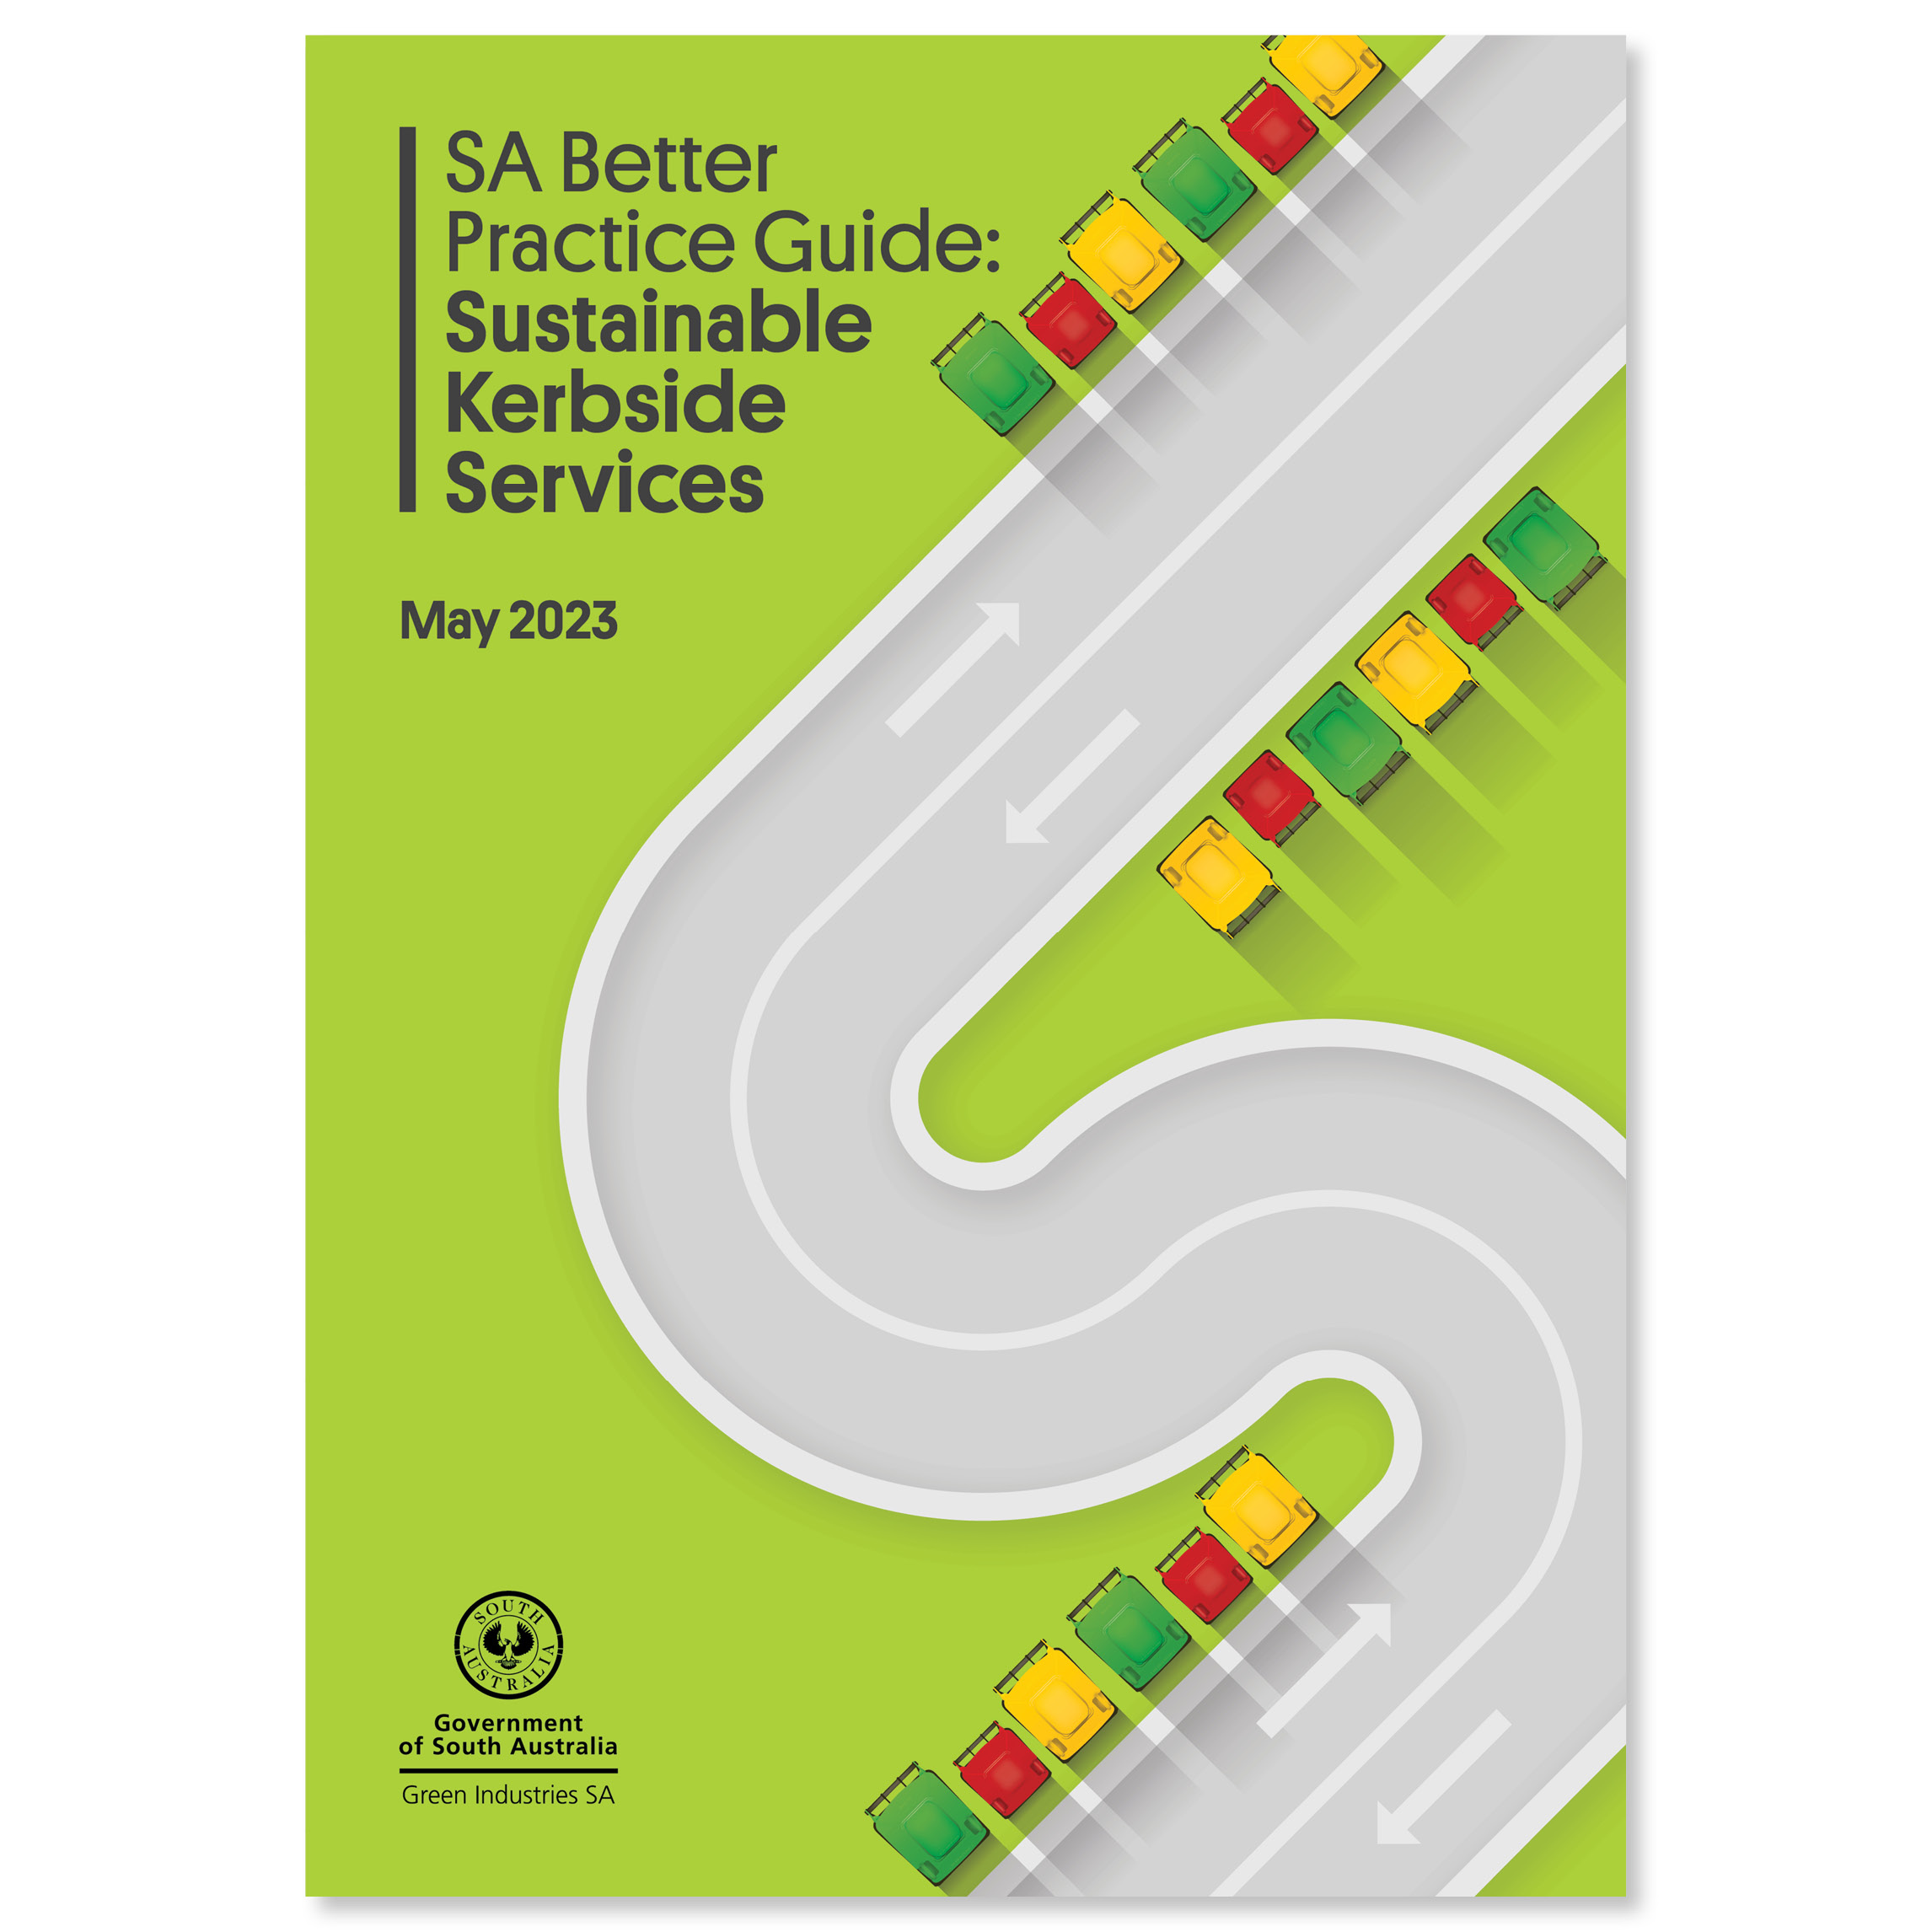 SA Better Practice Guide: Sustainable Kerbside Services